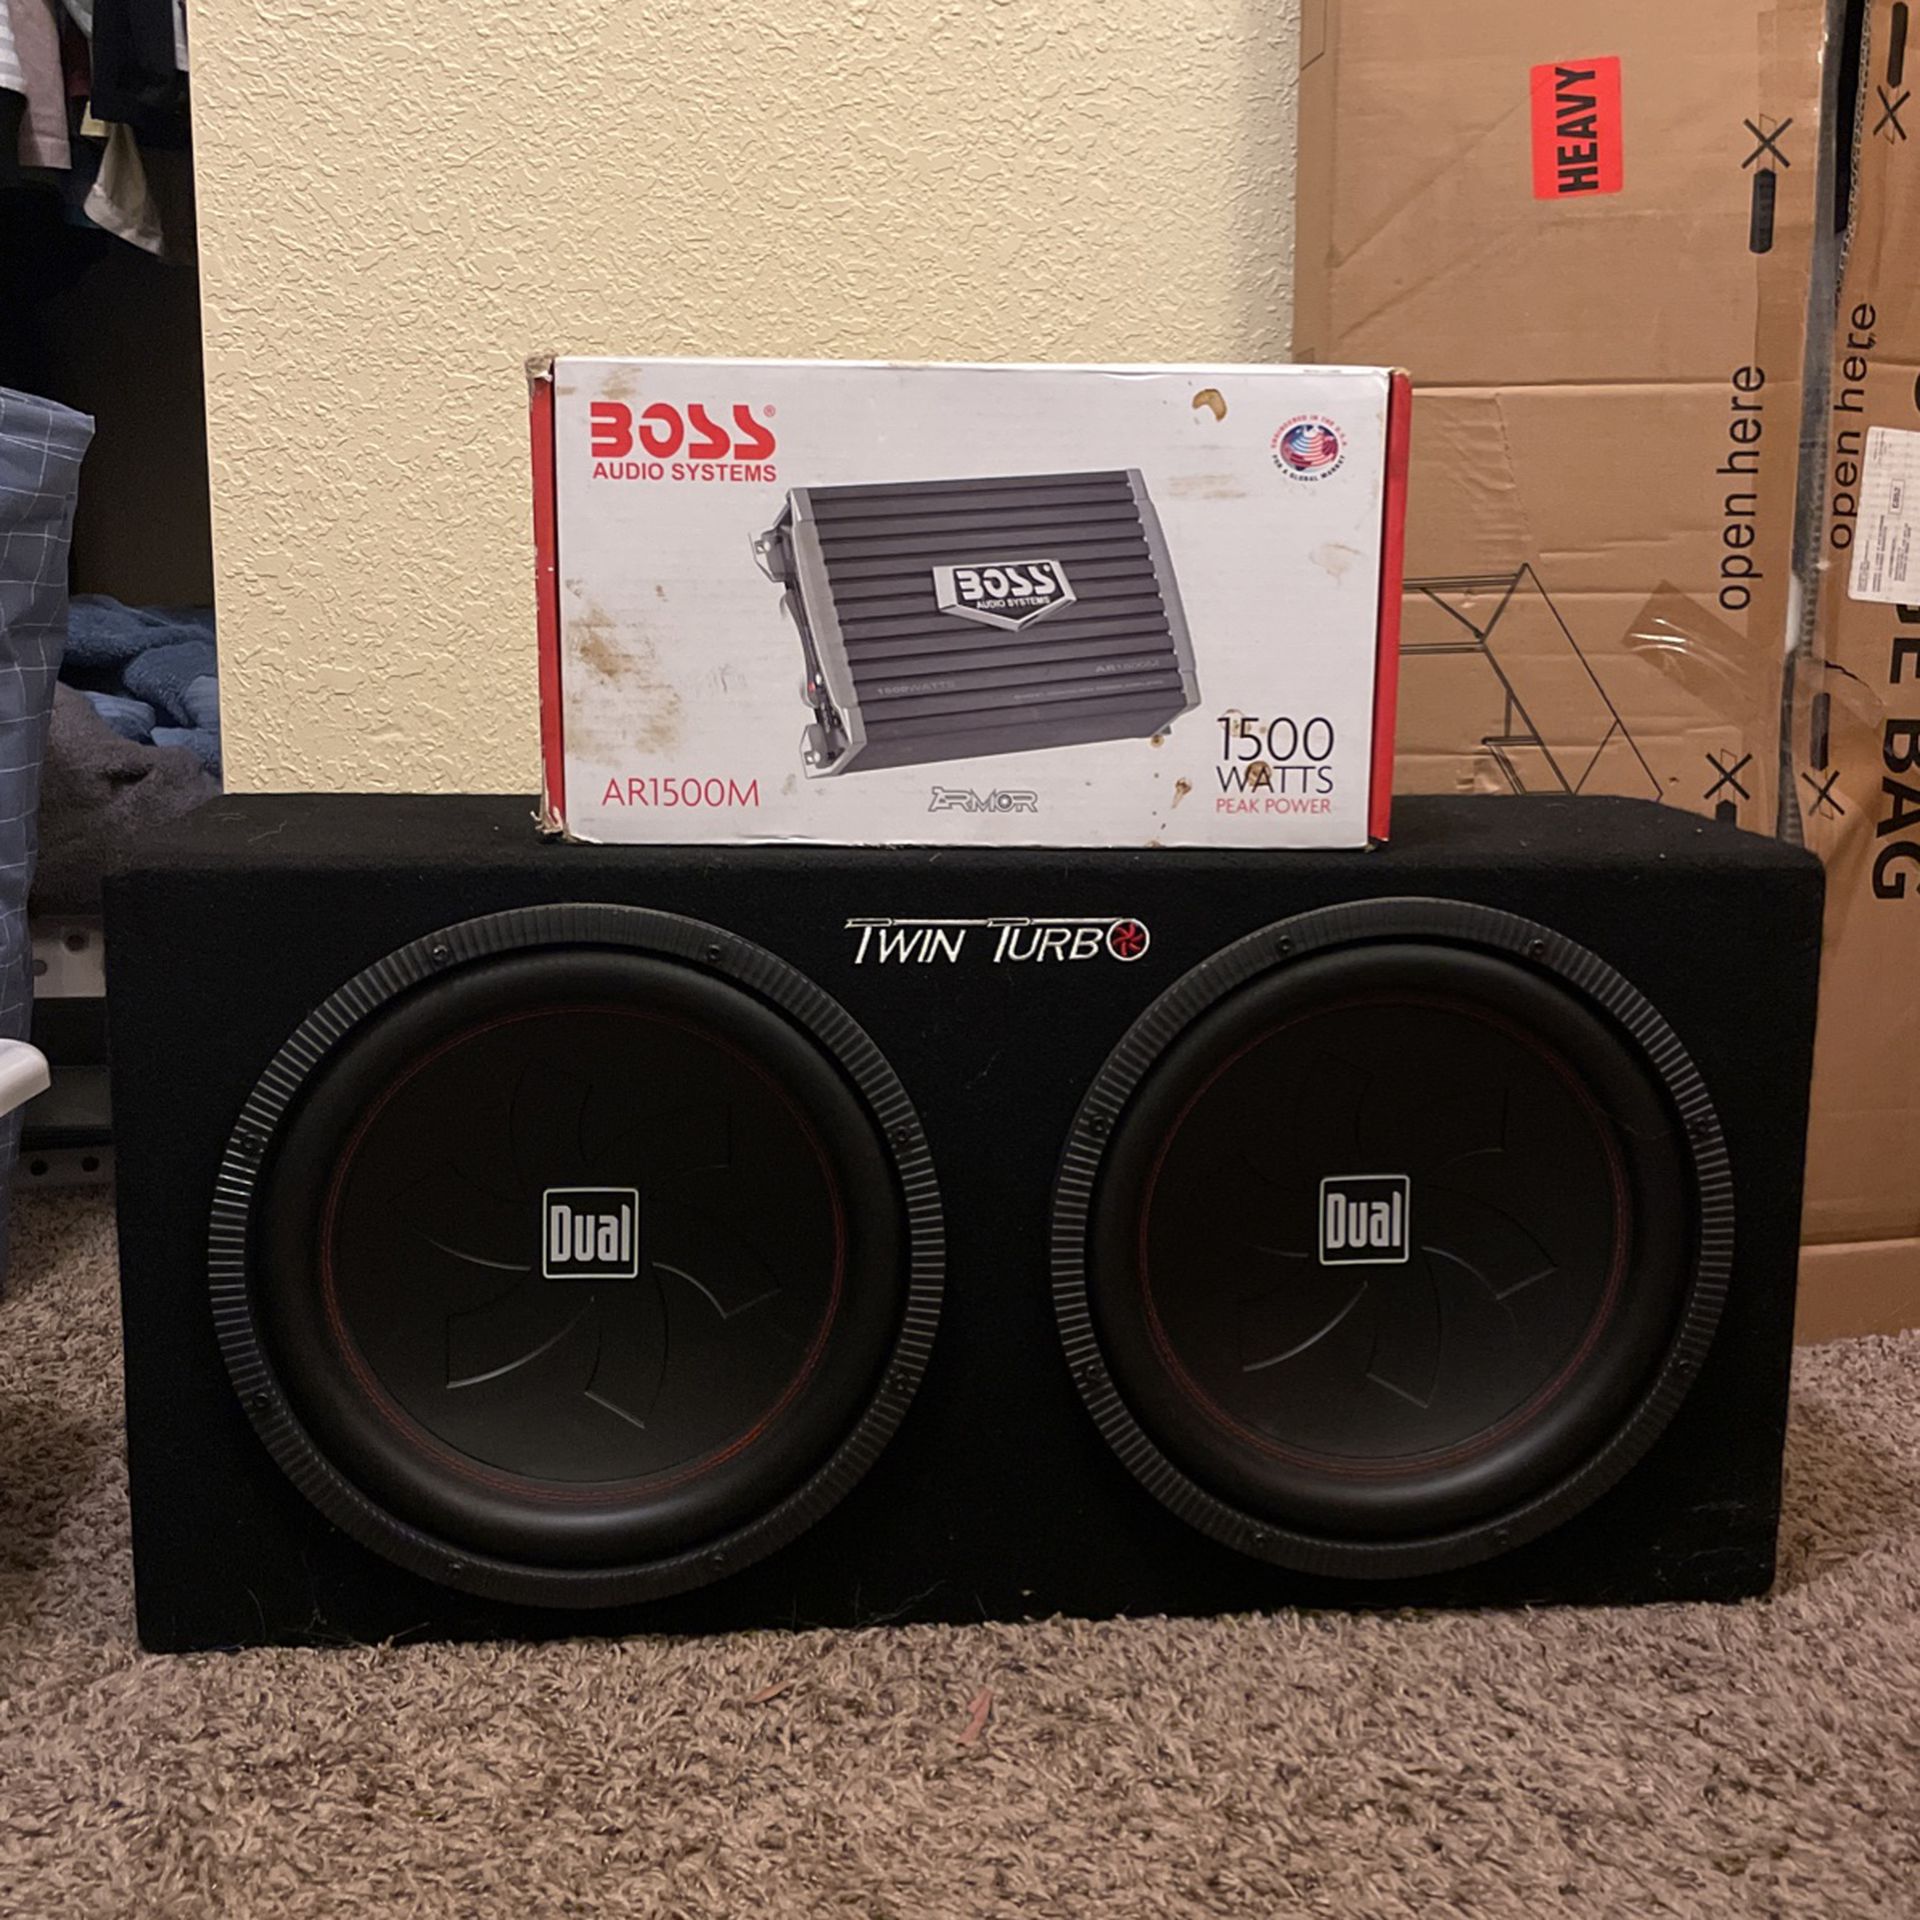 Dual Electronics SBX212i 12 inch subwoofer + Boss Audio Systems AR1500M